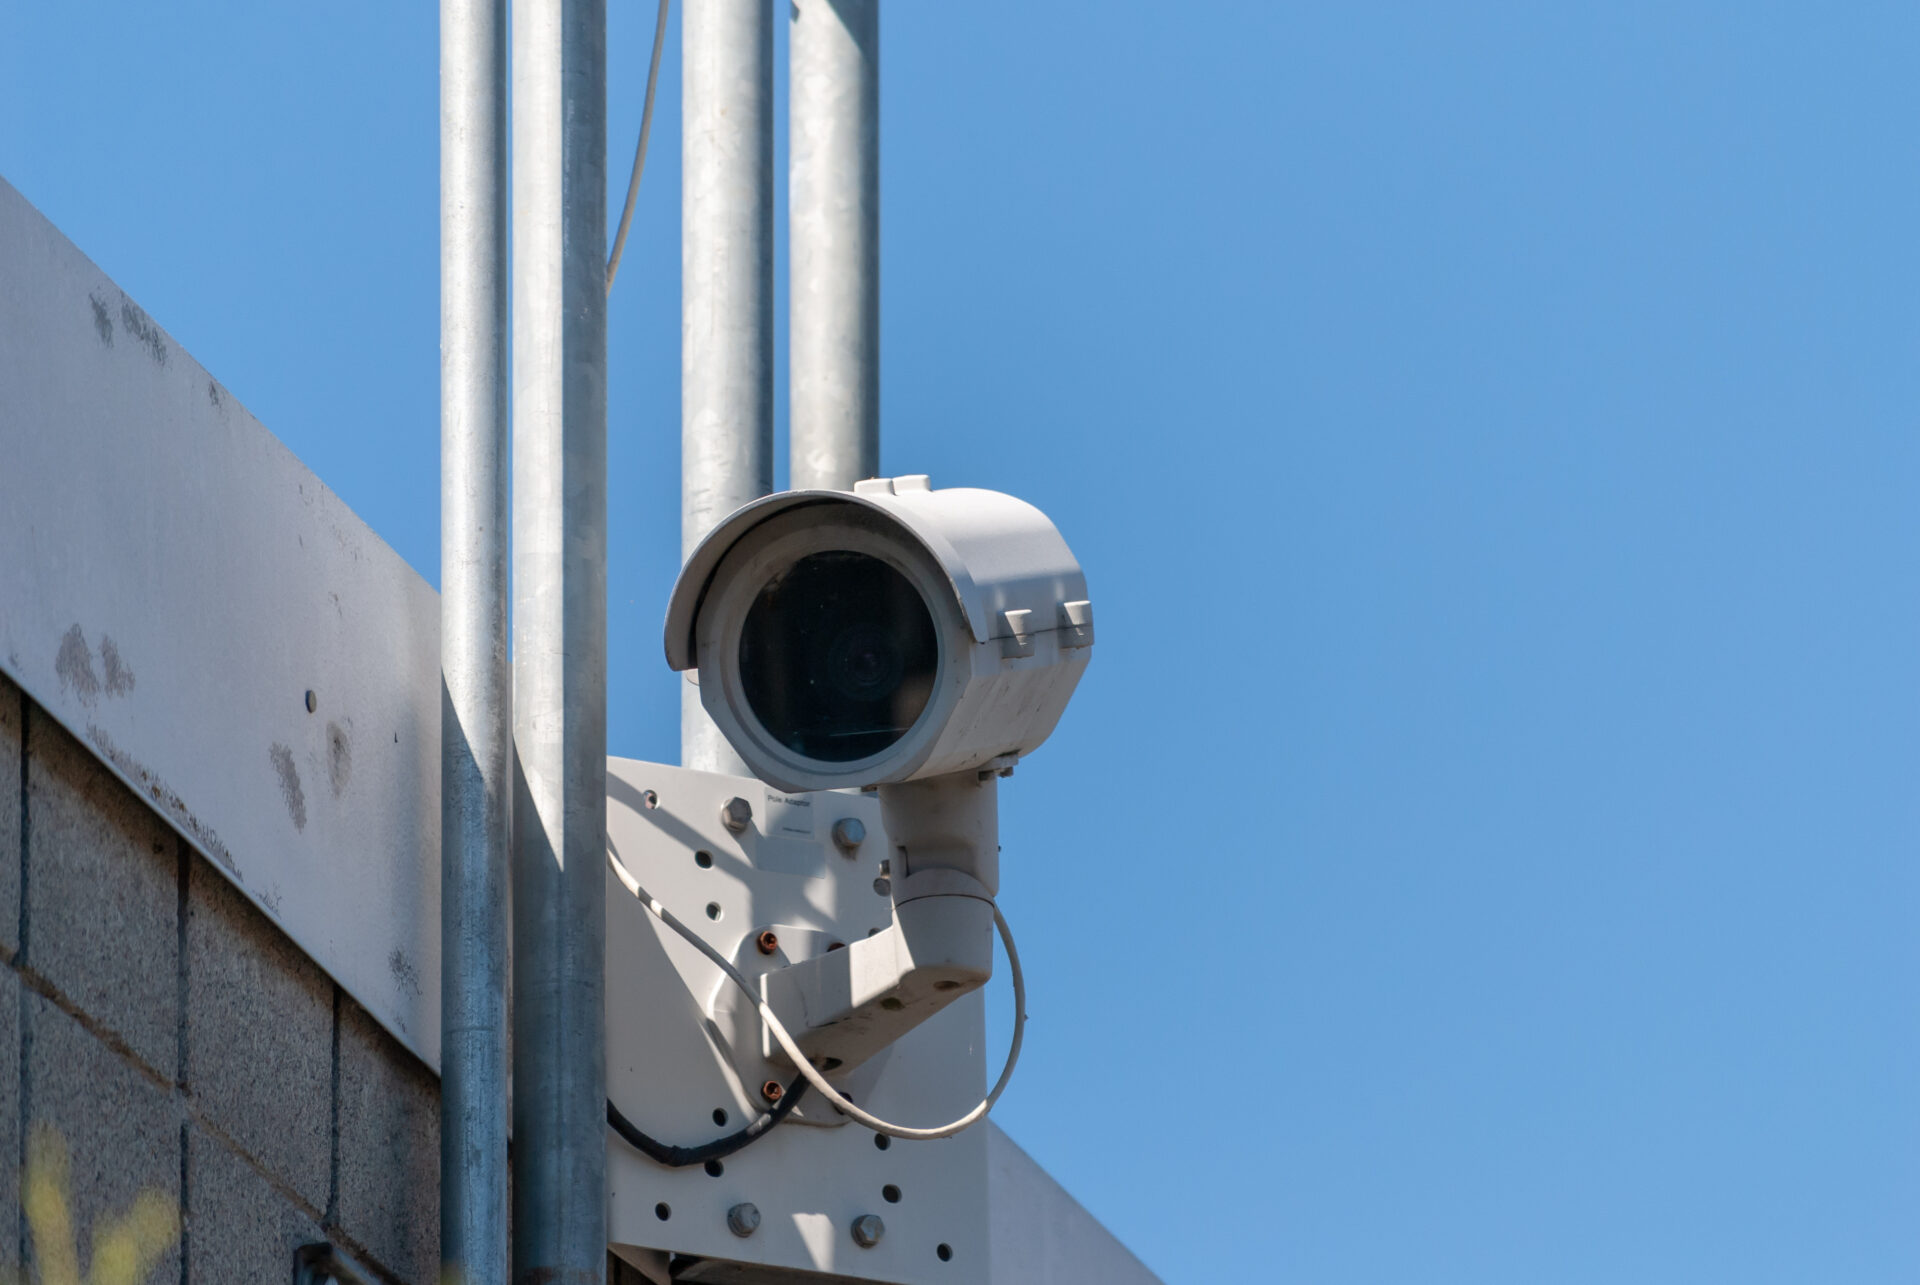 Four Counties To Implement Facial Recognition For School Safety